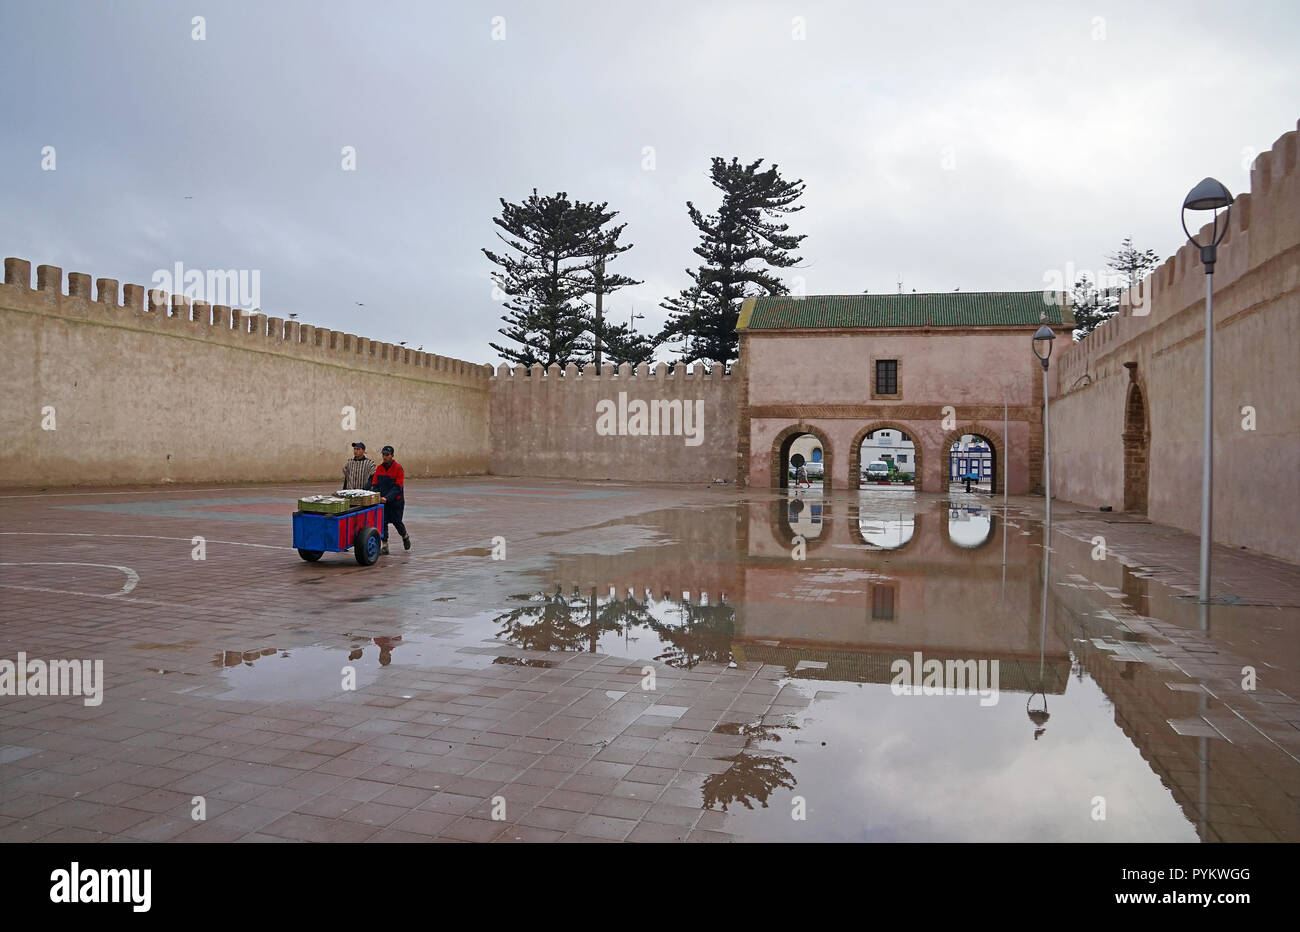 Man with wheel barrow in front of Bab El Mechouar on Place Moulay Hassan in Essaouira, Morocco, Africa Stock Photo